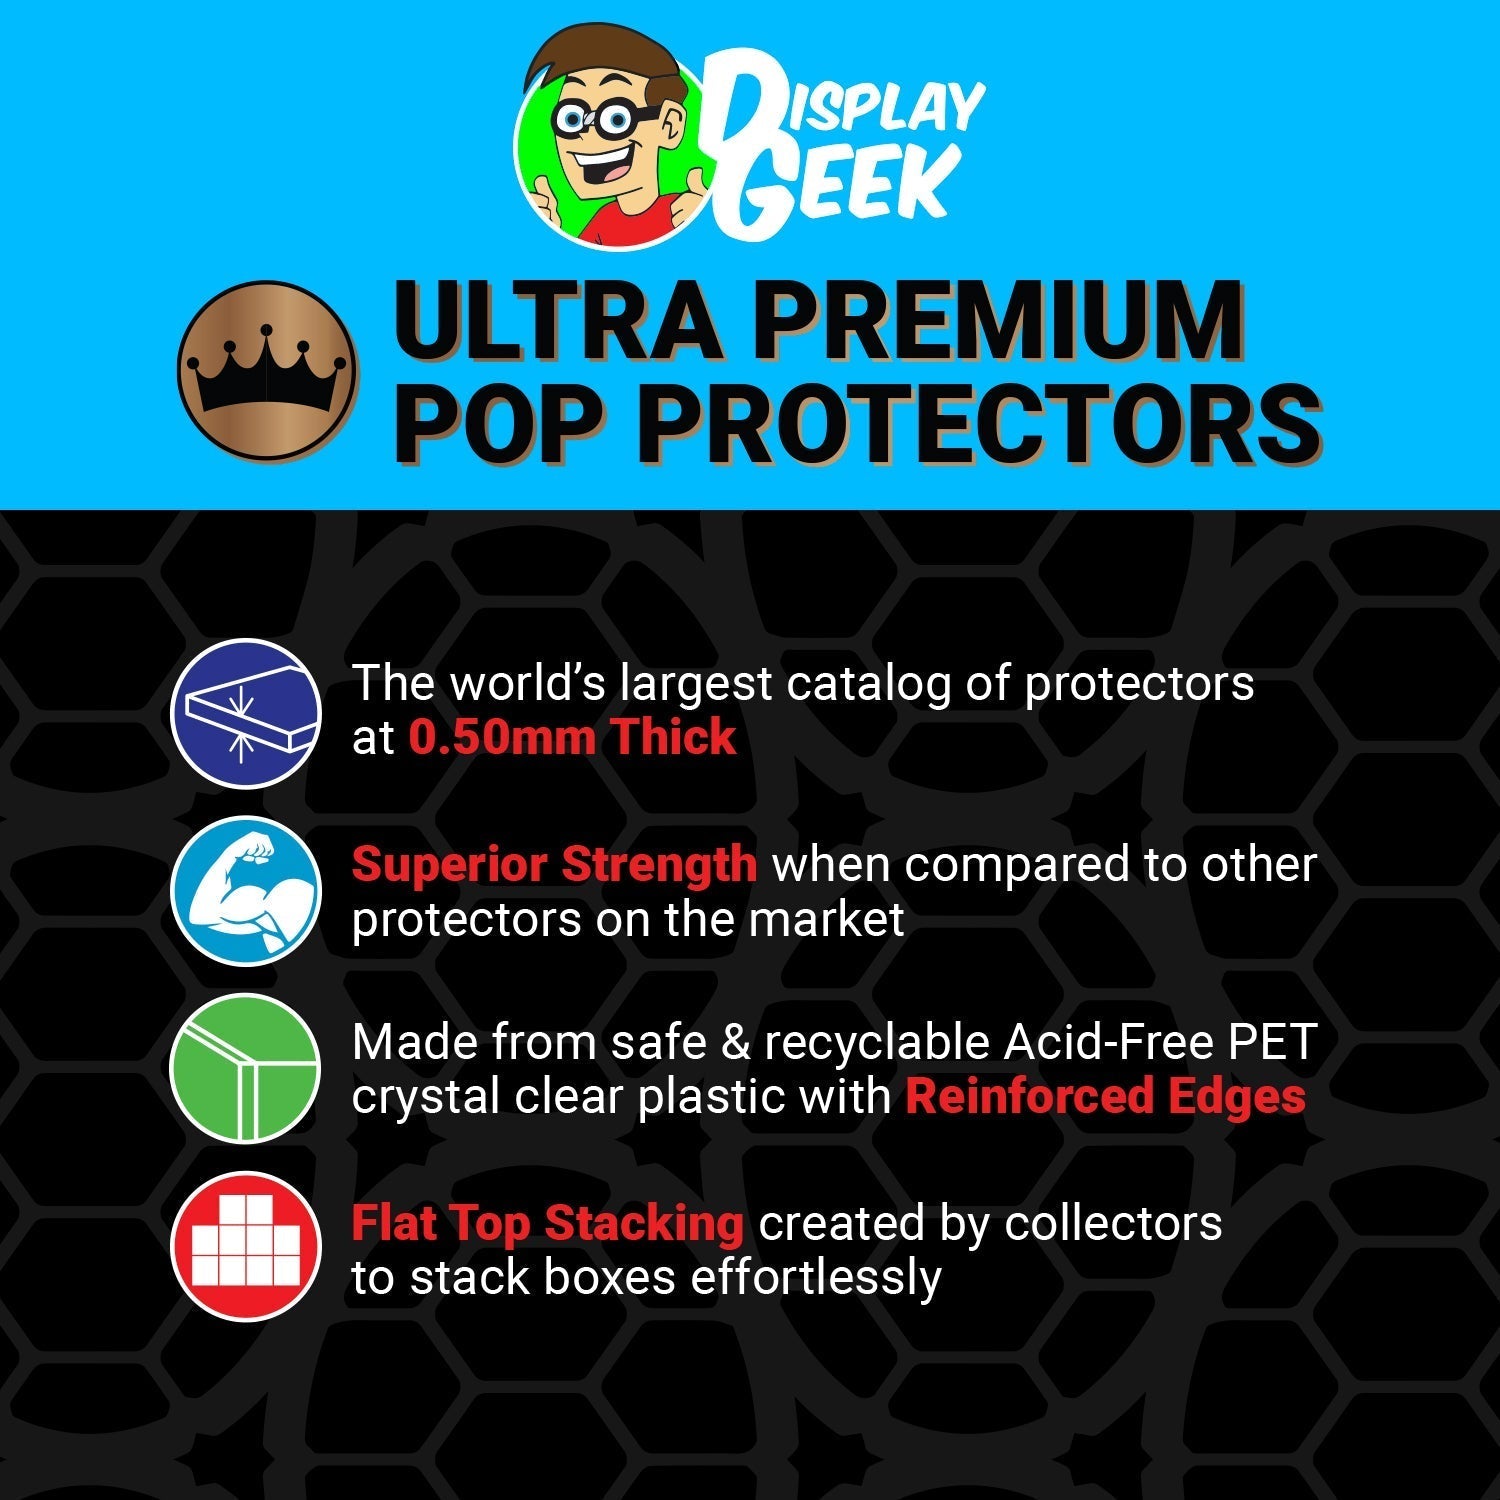 Pop Protector for Ben Kenobi on Eopie #549 Funko Pop Rides - PPG Pop Protector Guide Search Created by Display Geek